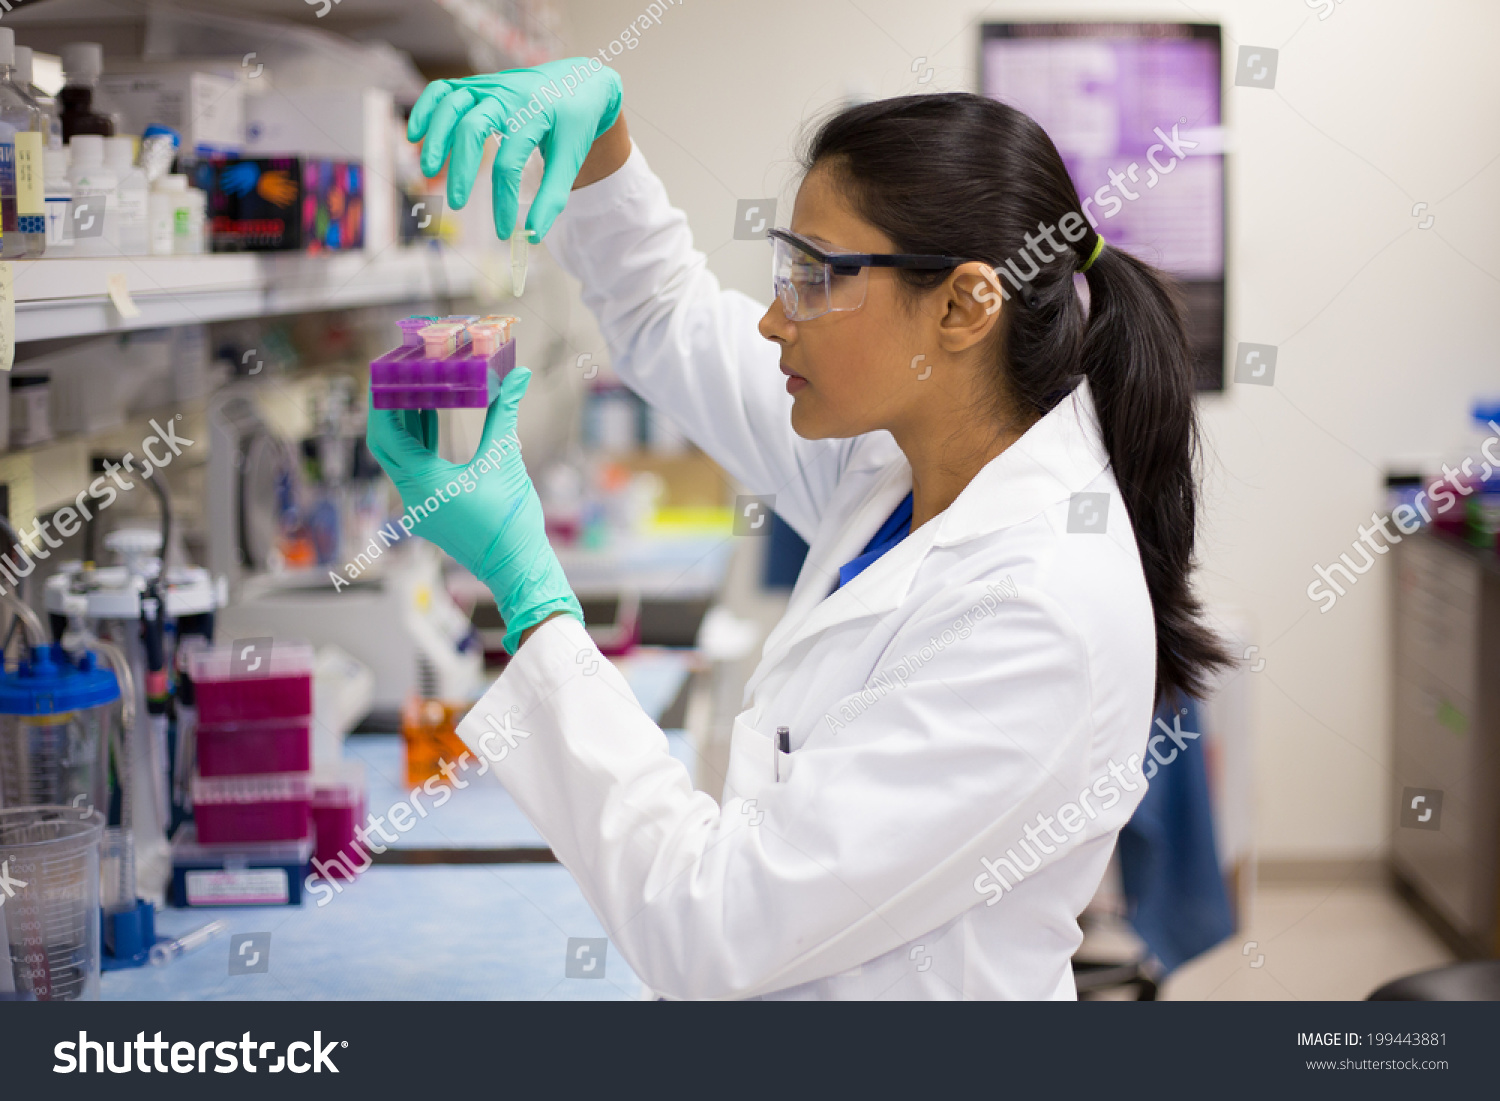 Closeup portrait, young scientist in labcoat wearing nitrile gloves, doing experiments in lab, academic sector.